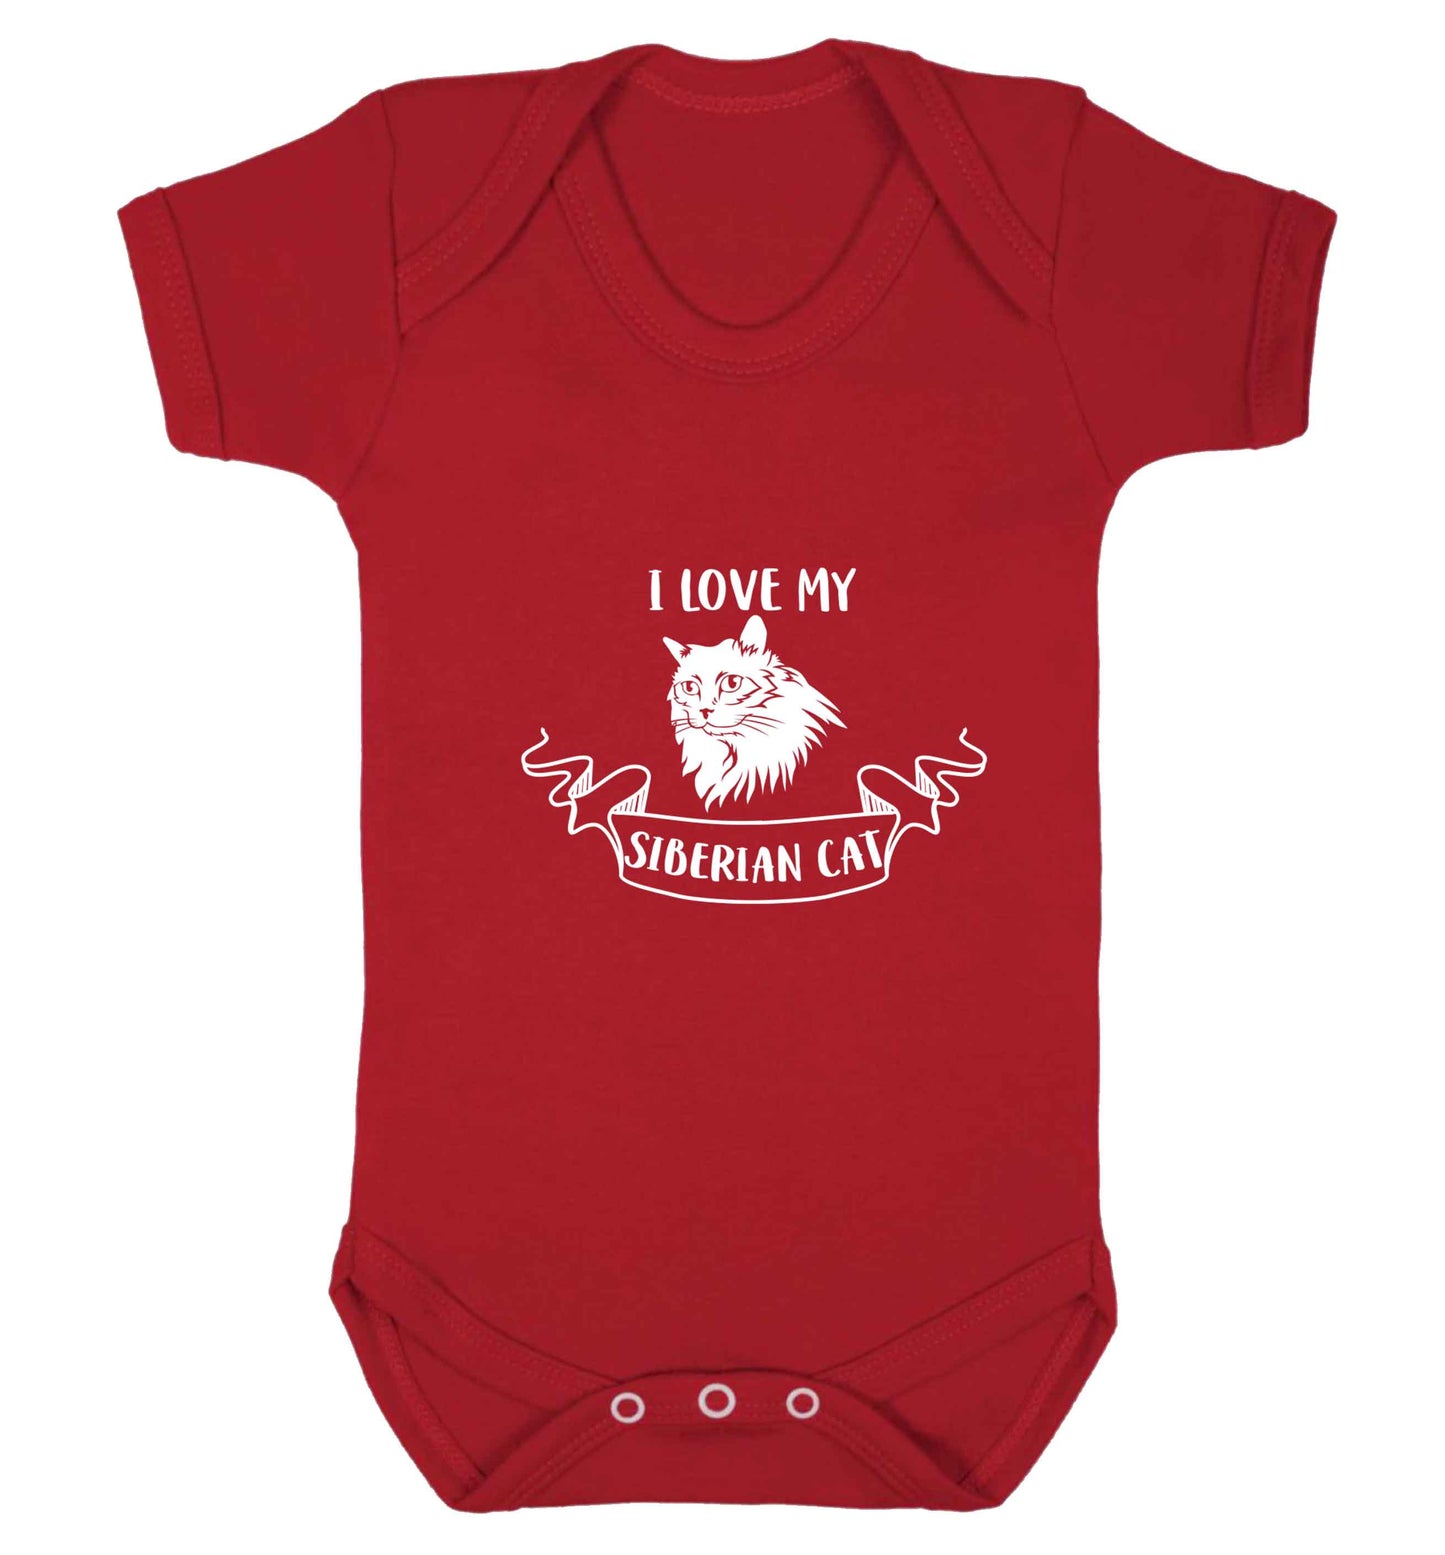 I love my siberian cat baby vest red 18-24 months